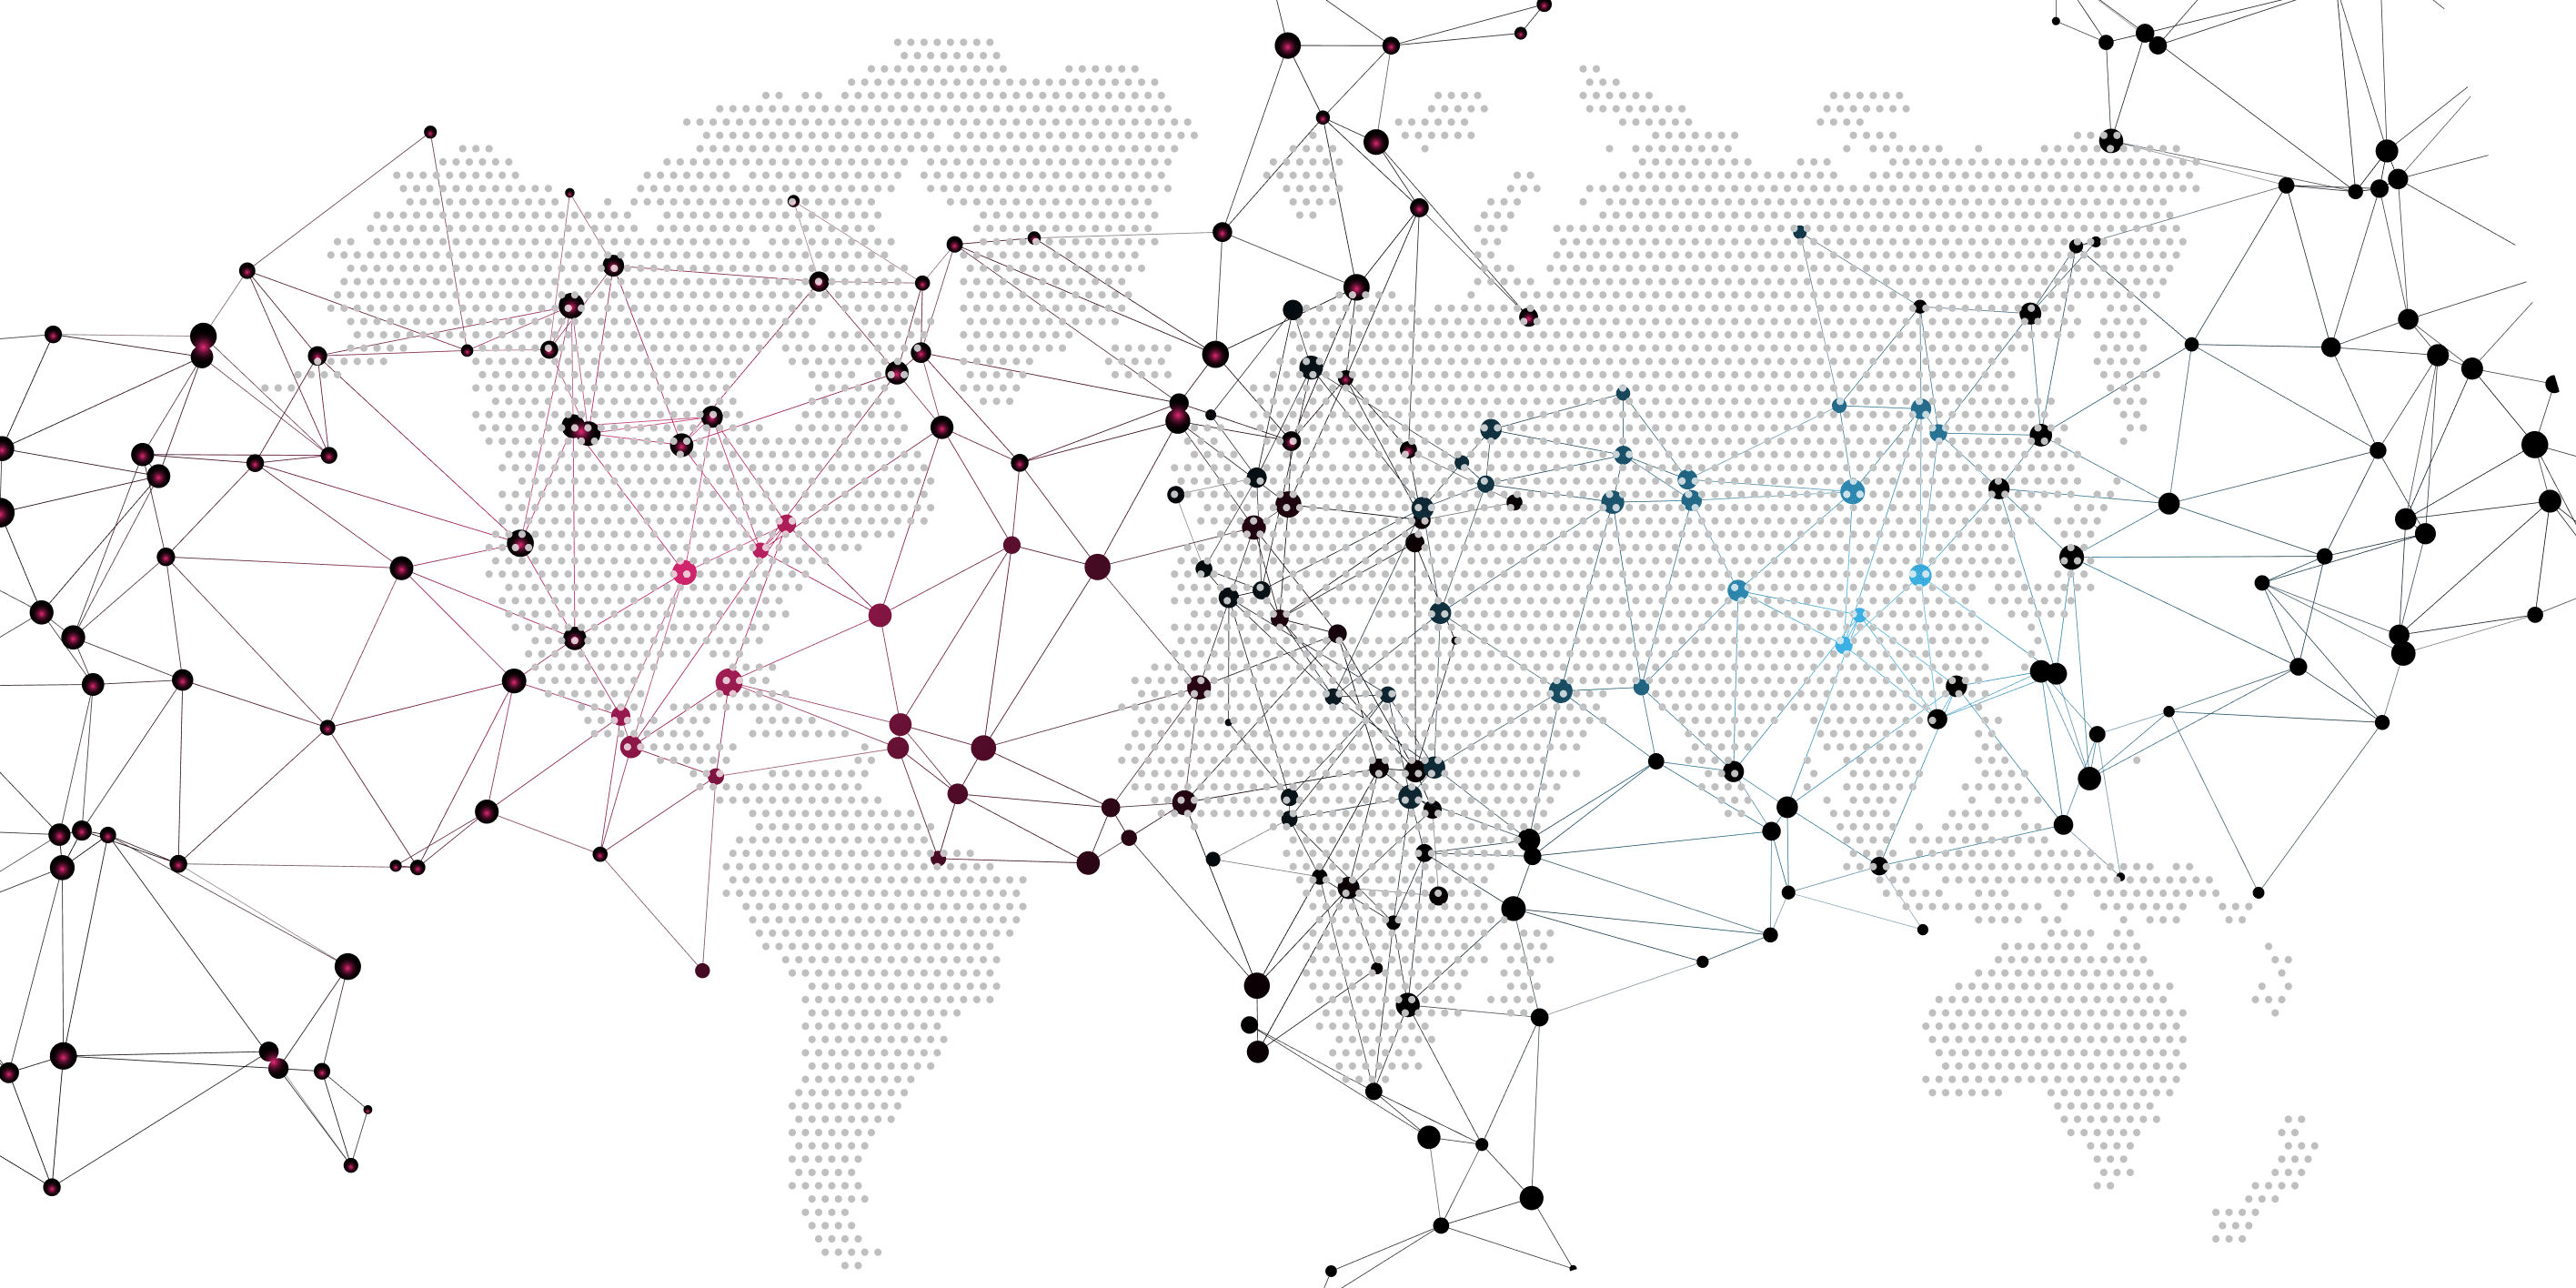 Vector illustration of an abstract world map of dots and lines.